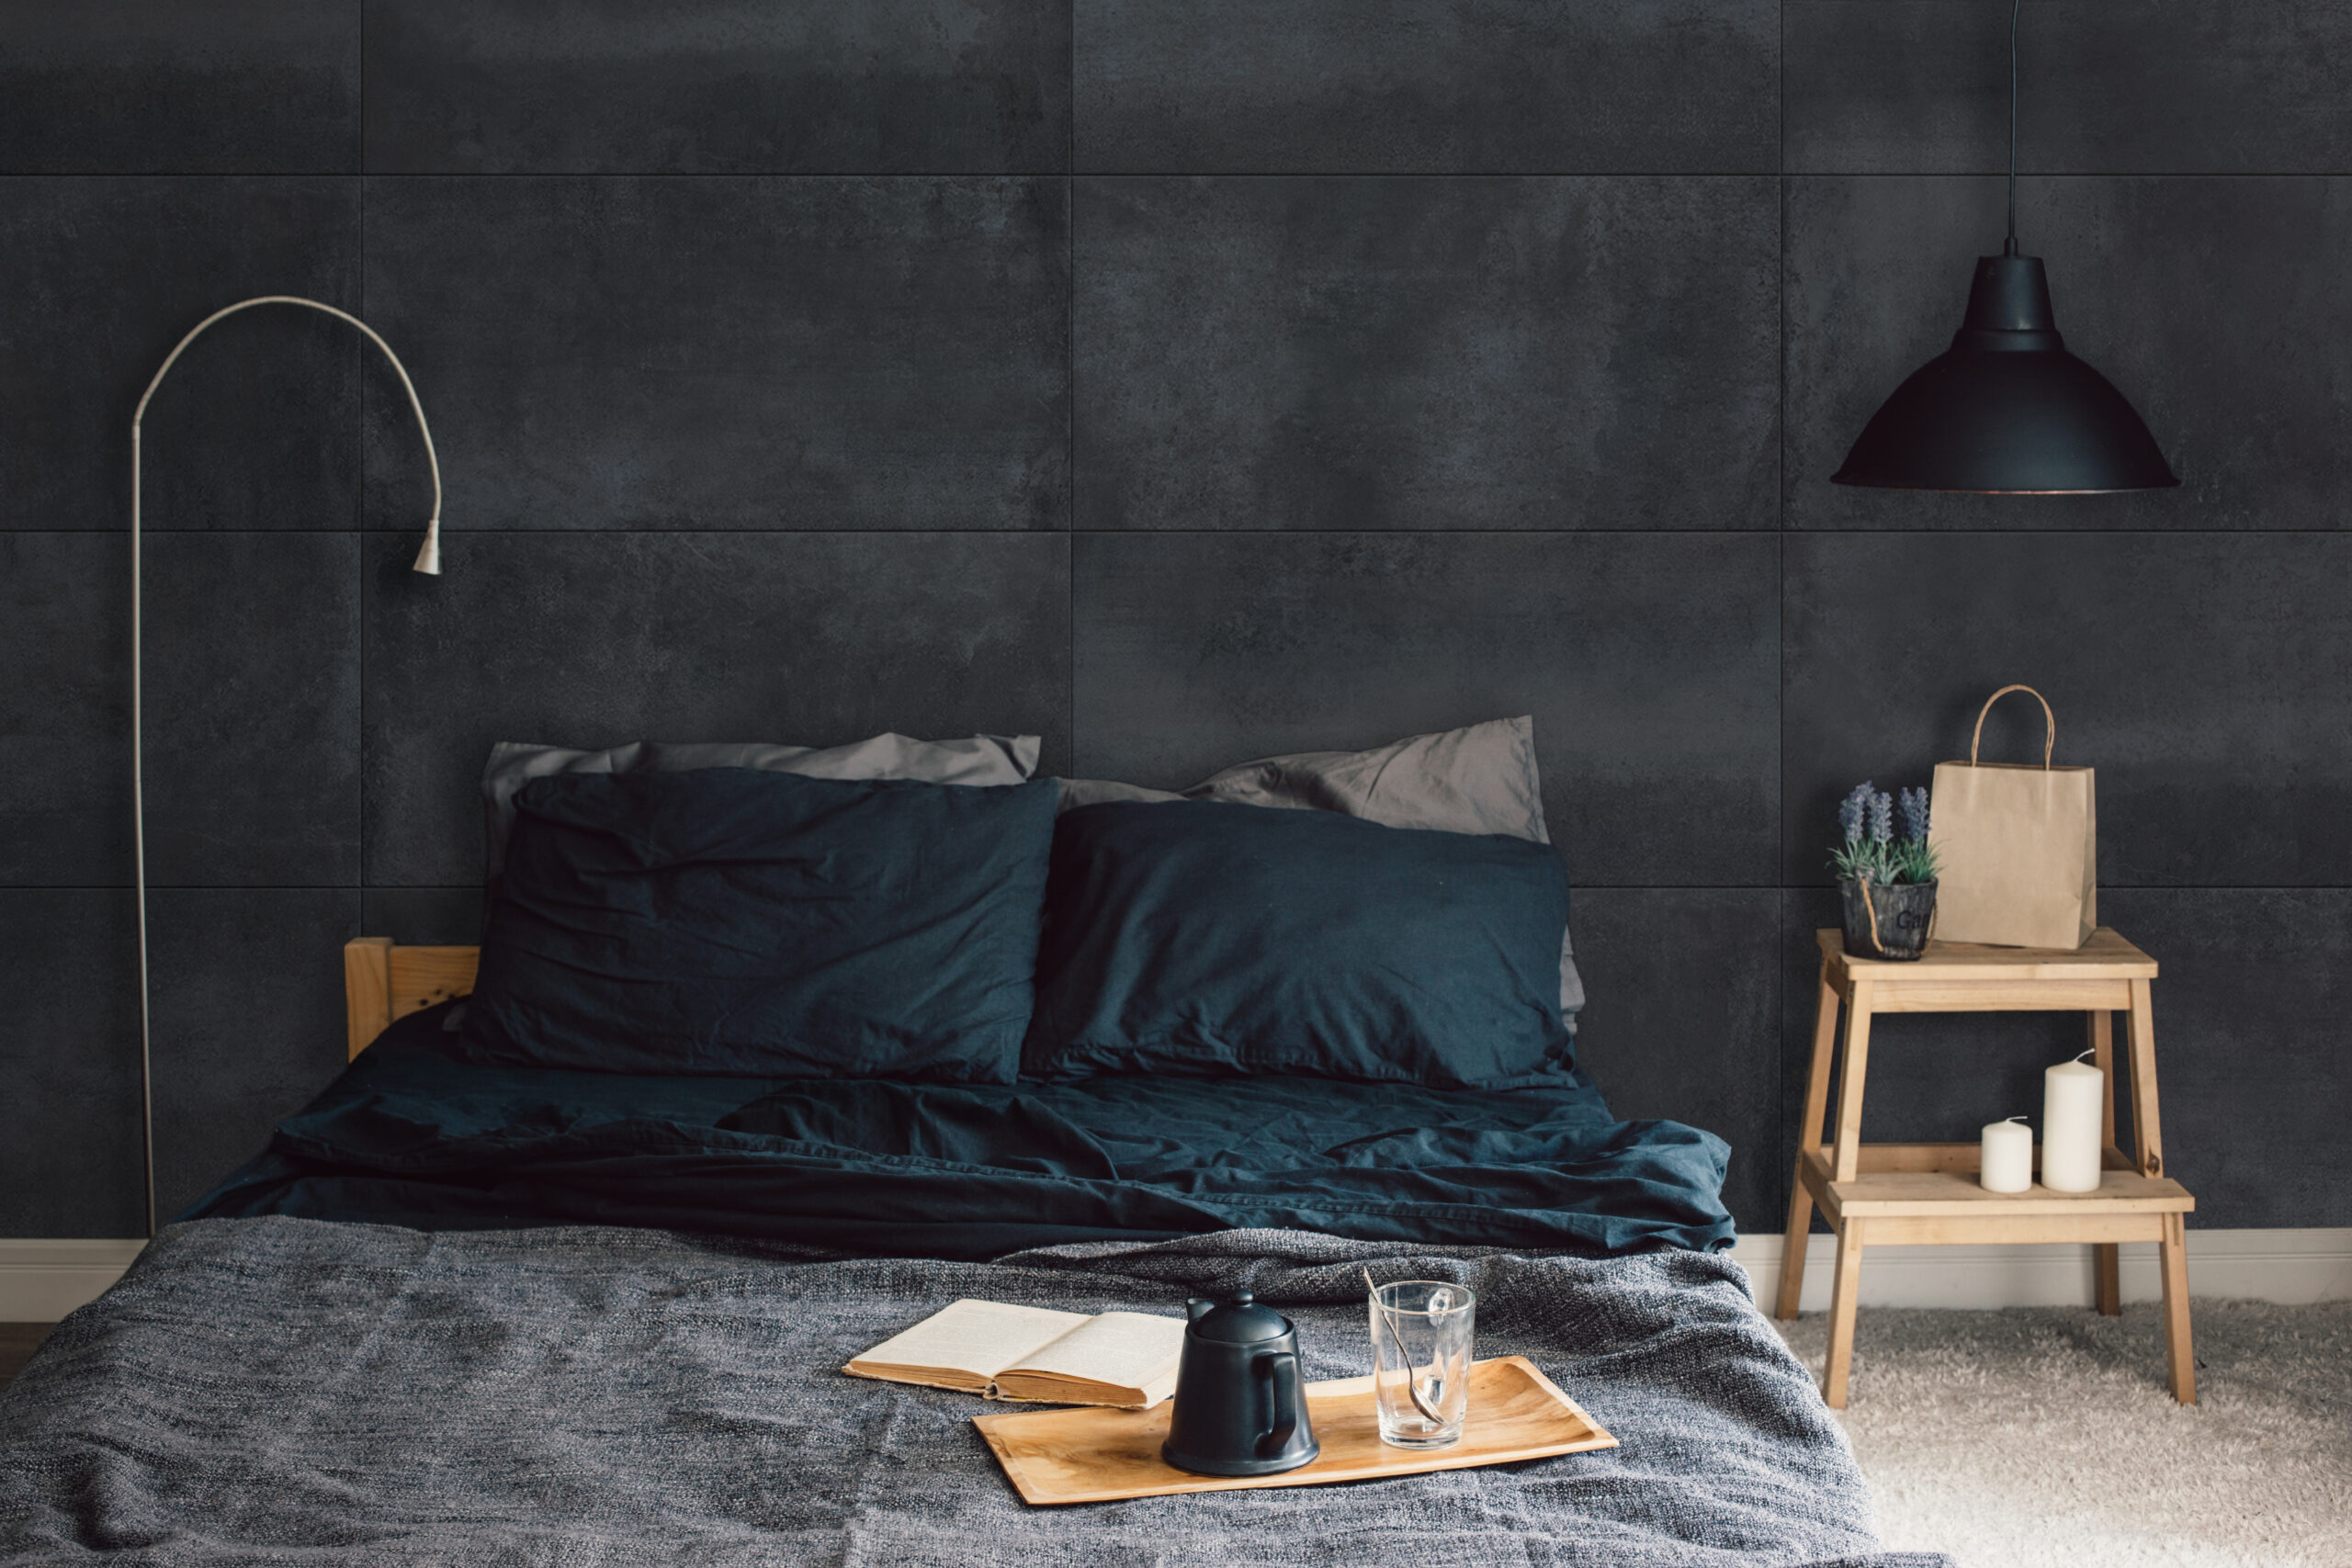 Black stylish loft bedroom. Unmade bed with breakfast and reading on tray. Lamp and interior decor over blank blackboard wall with copyspace. Cozy modern living space.